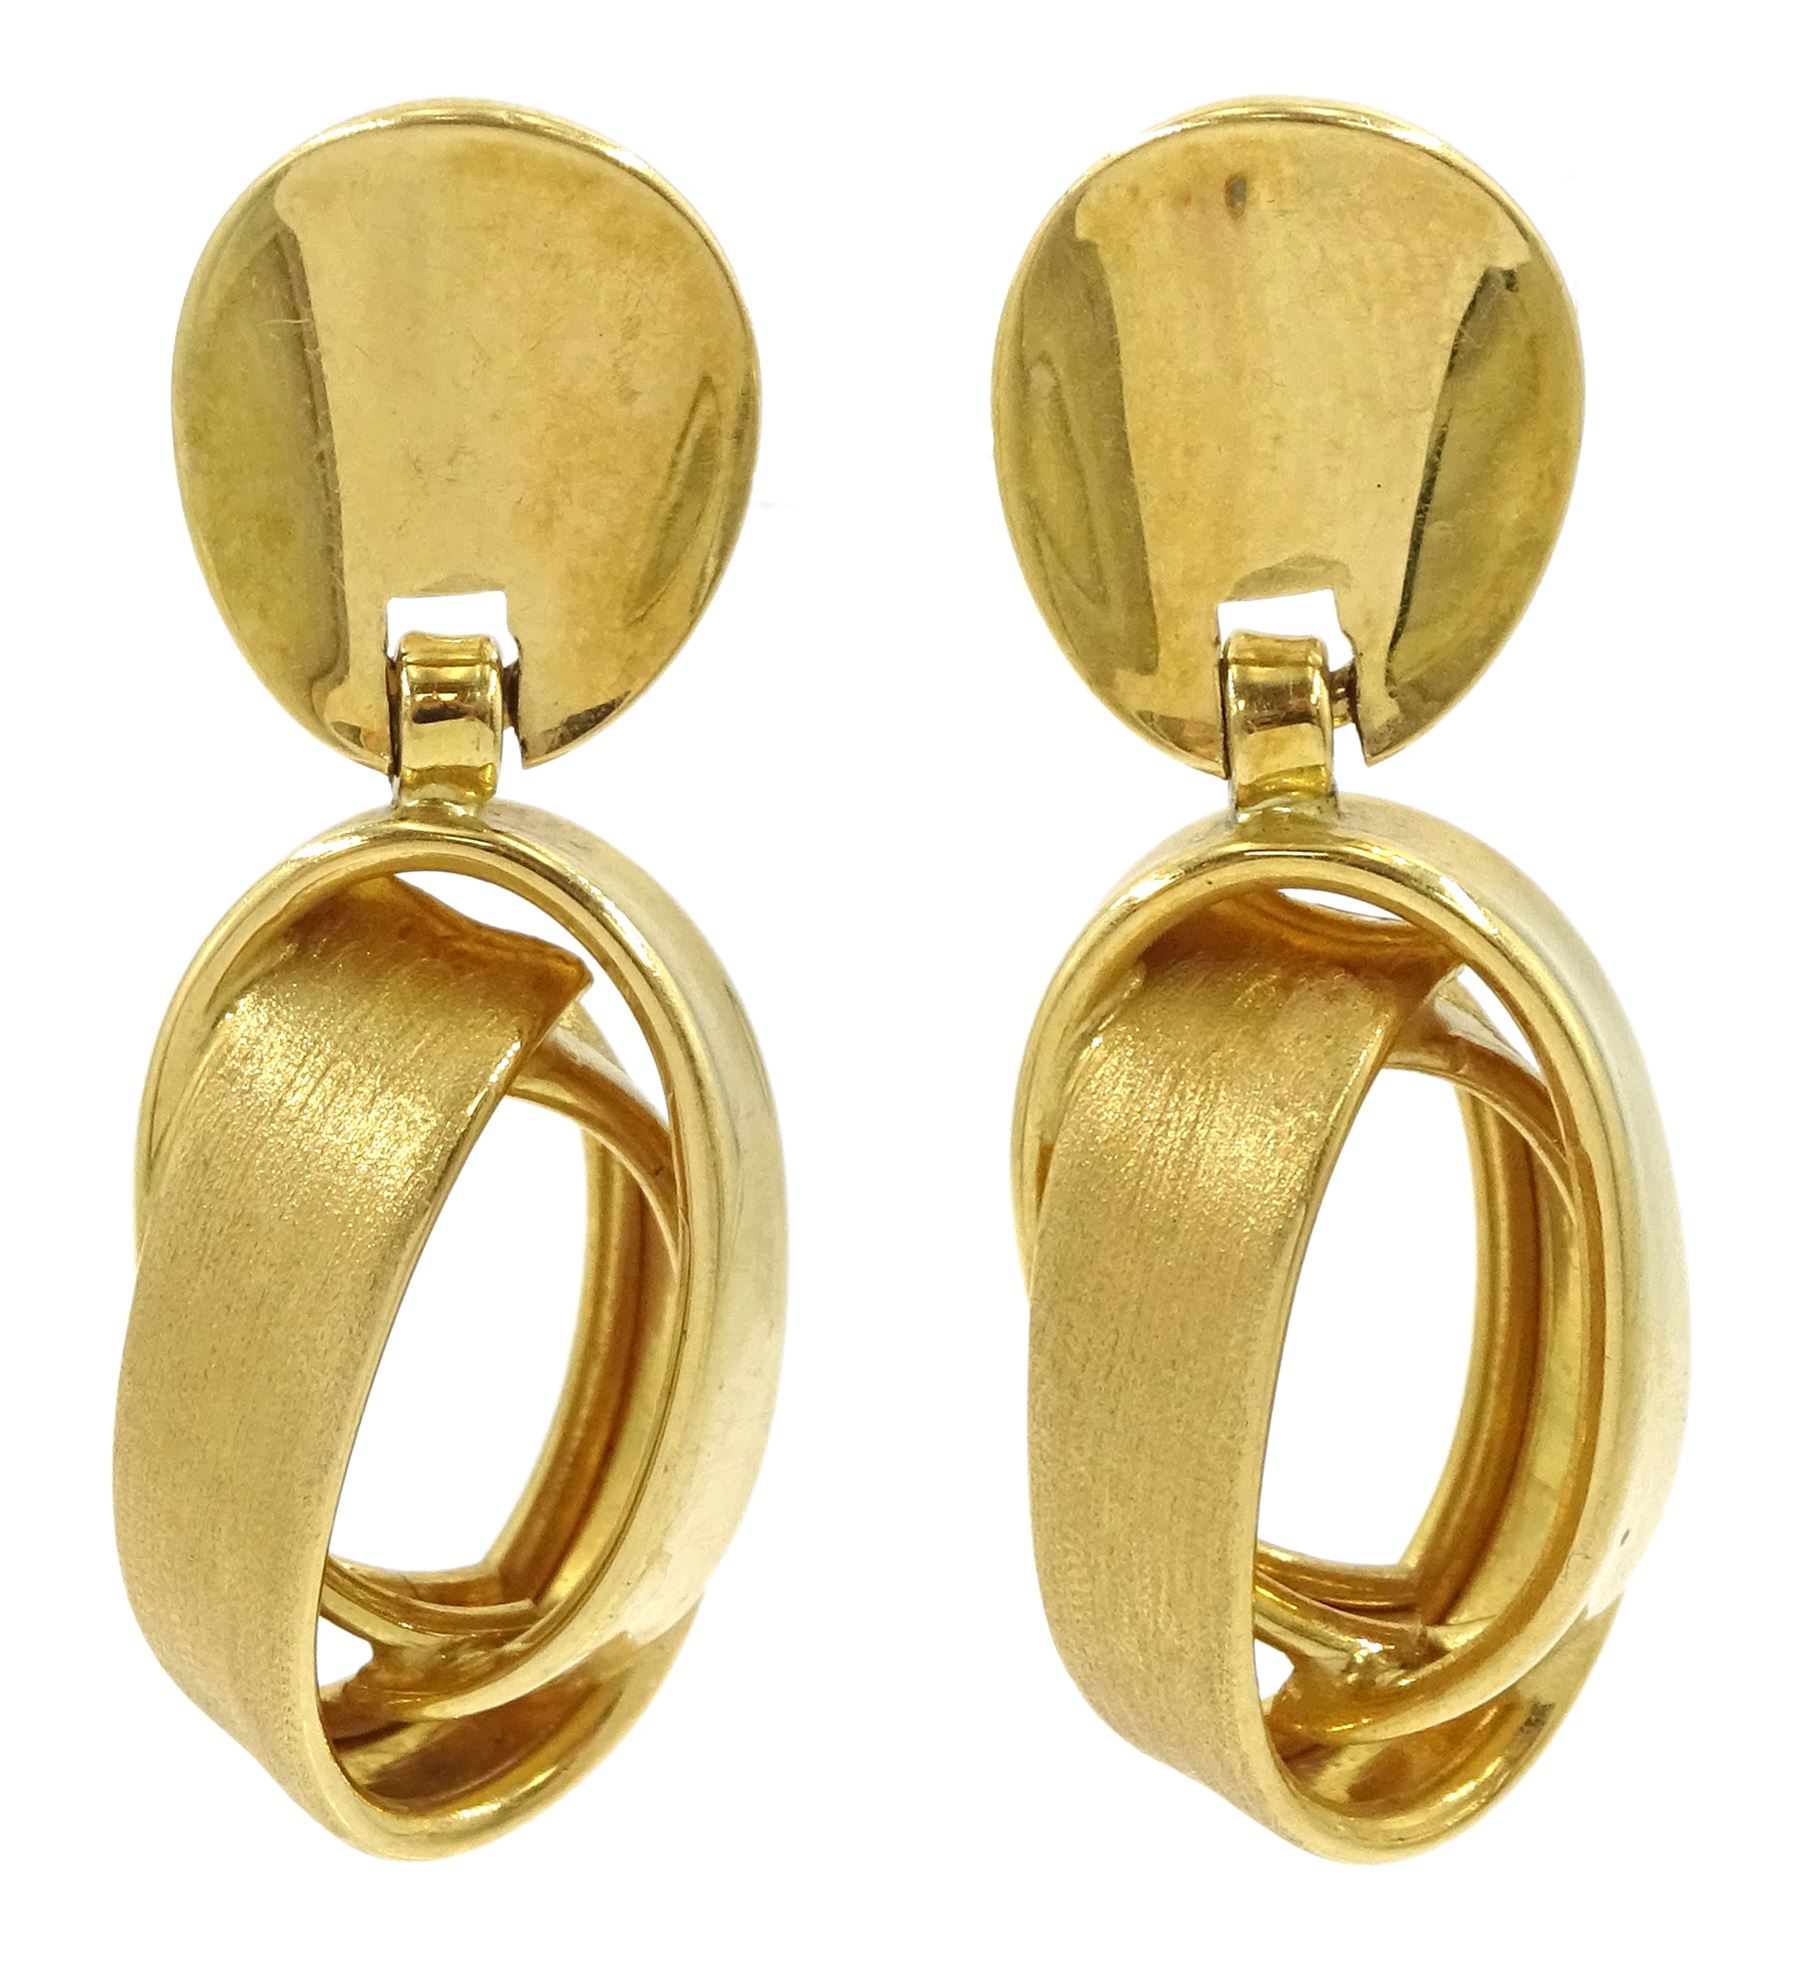 Pair of 18ct gold brushed and polished fancy hoop pendant stud earrings